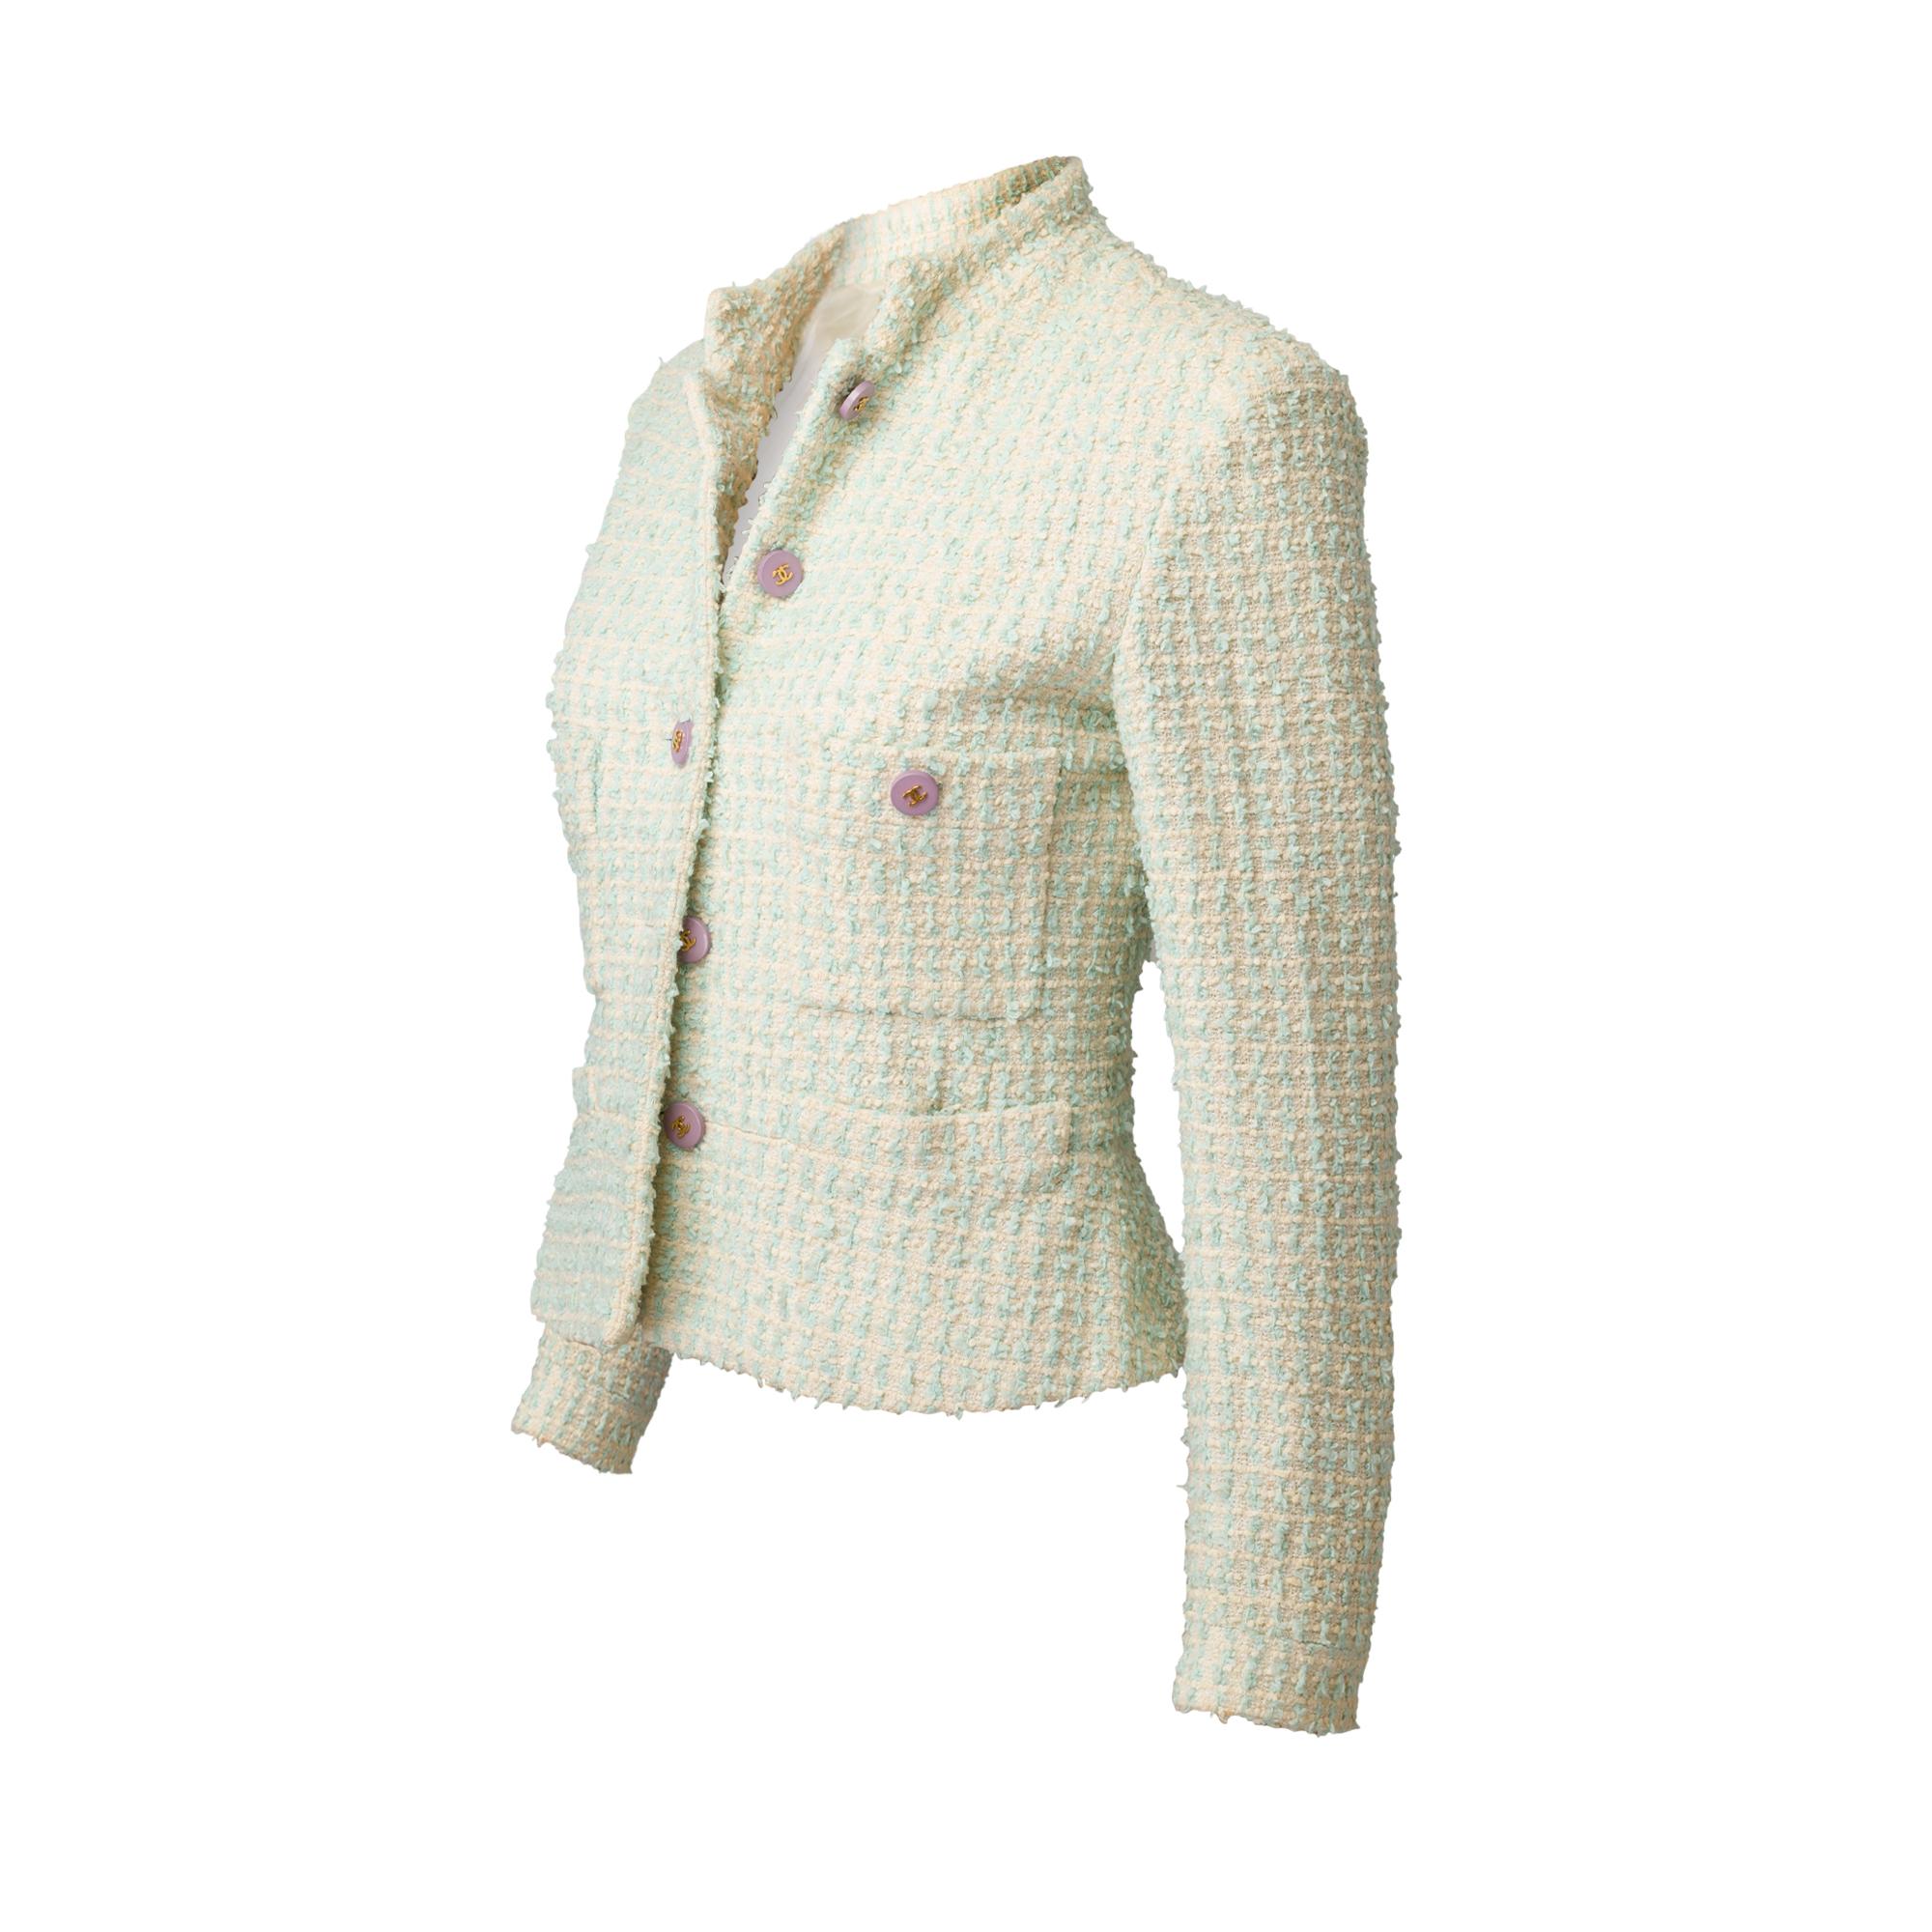 CHANEL Mao collar jacket in beige and pastel green tweed.
Closure by round buttons of purple color and marked with double CC.
Lining in beige silk with CC logo.
Brand label present. Size label and composition not present.
In good condition. Slight